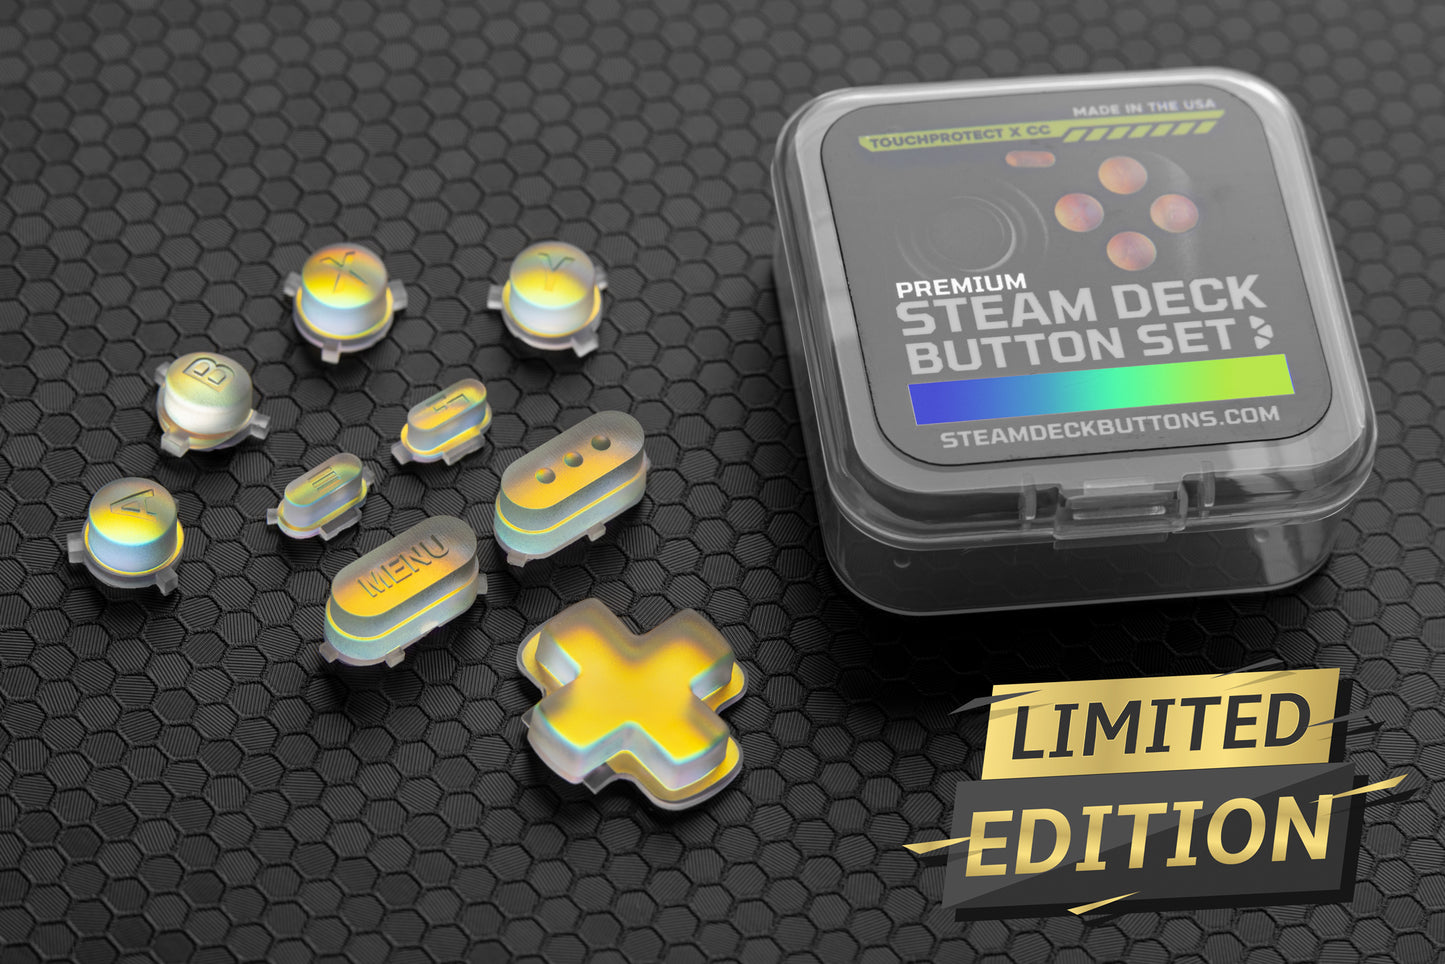 Steam deck button set holographic limited edition and reusable clamshell case. 